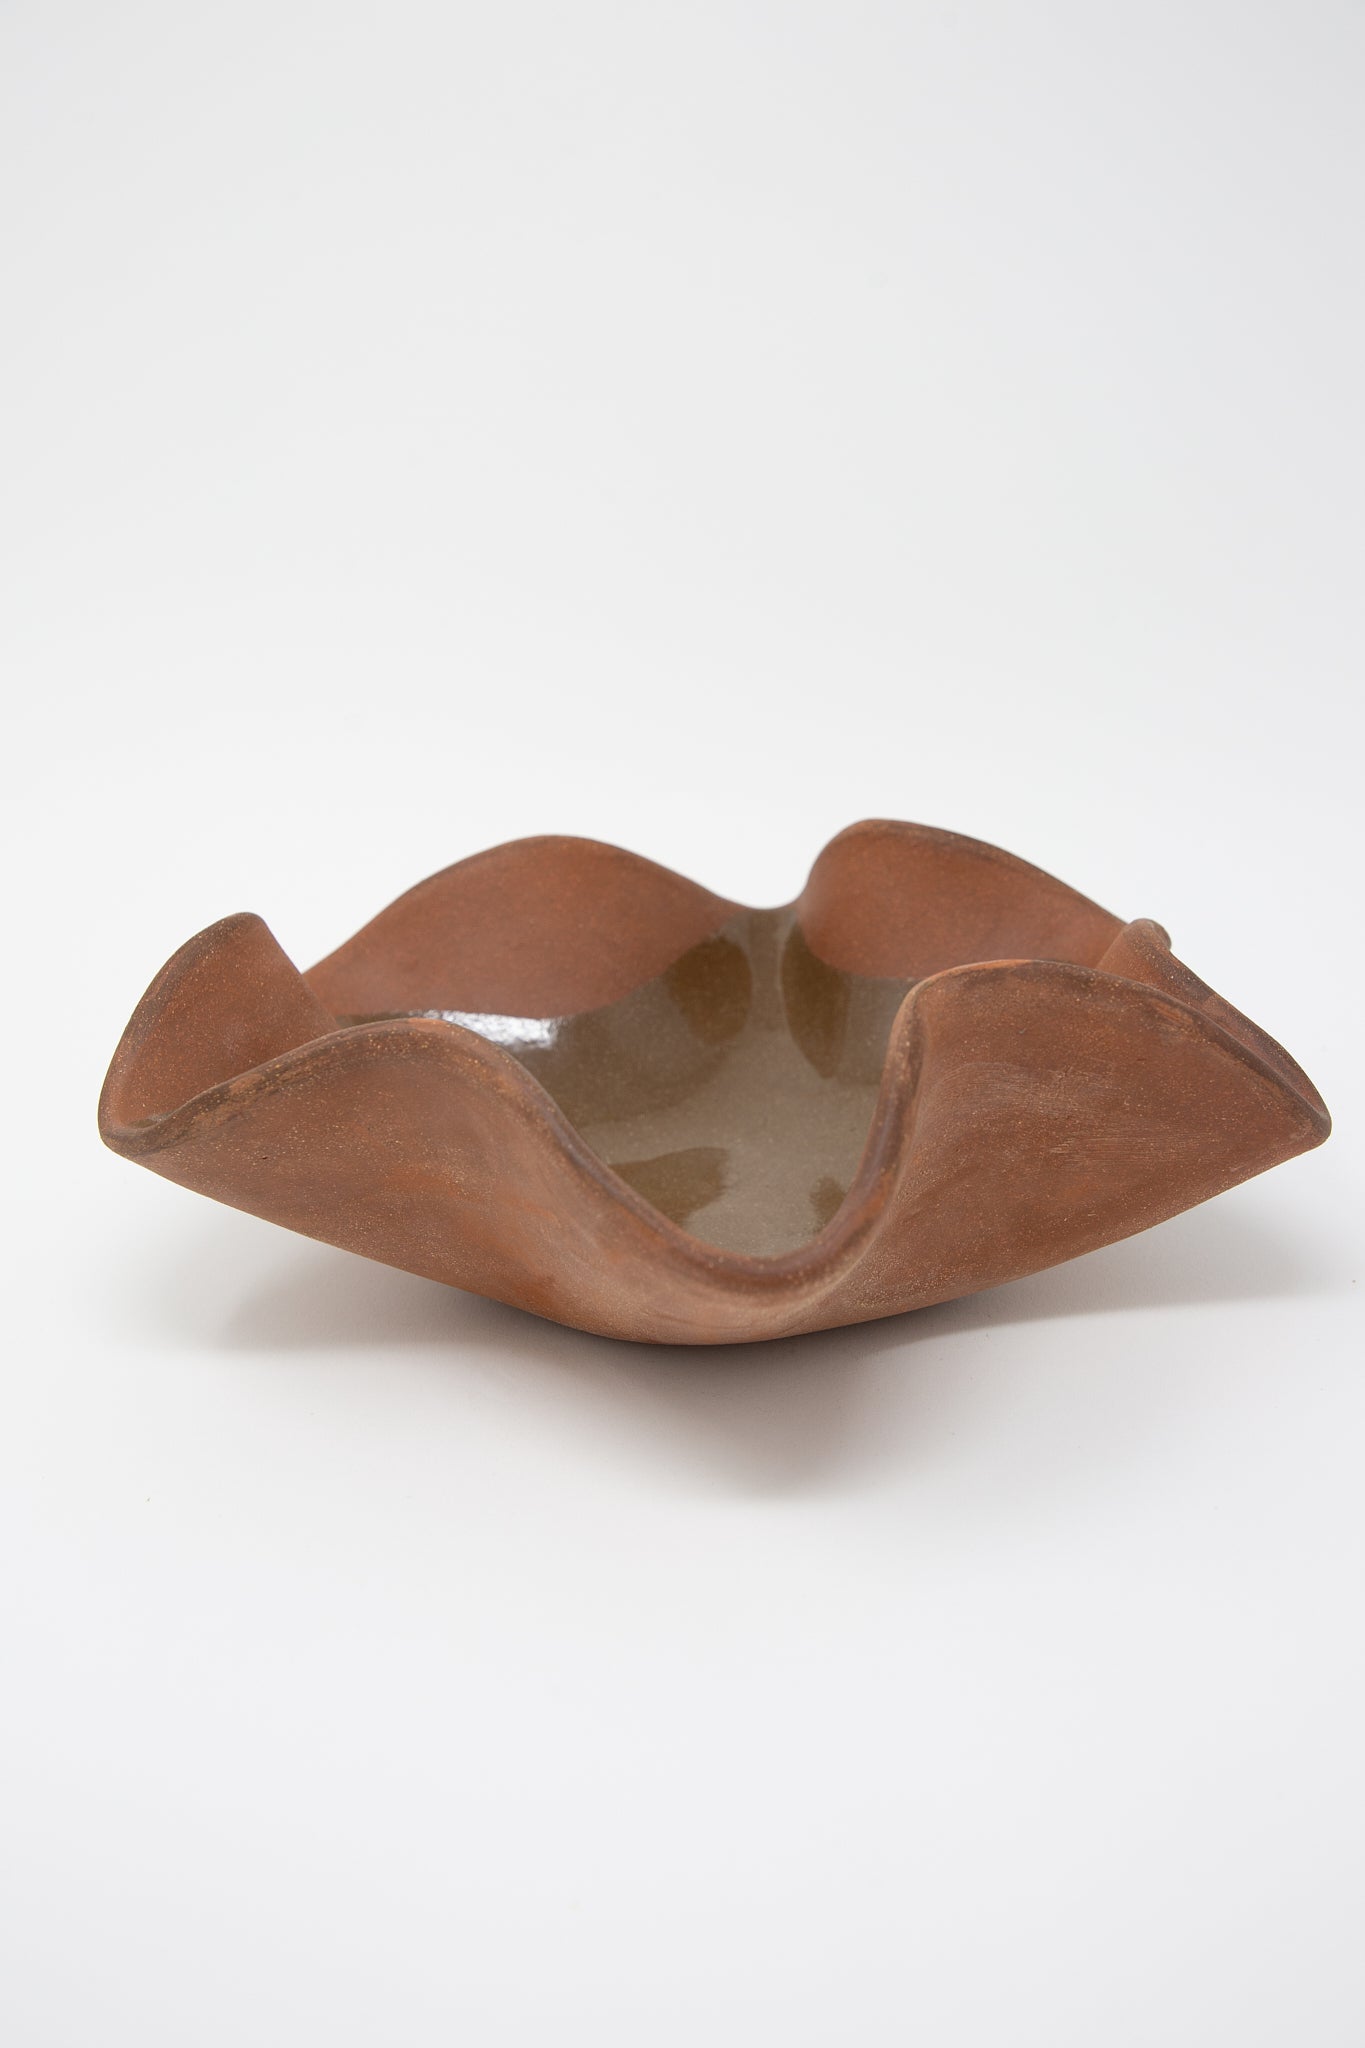 A Ruffle Bowl in Terracotta by Lost Quarry, with a curved shape, hand-built sculpture functional object on a white background.